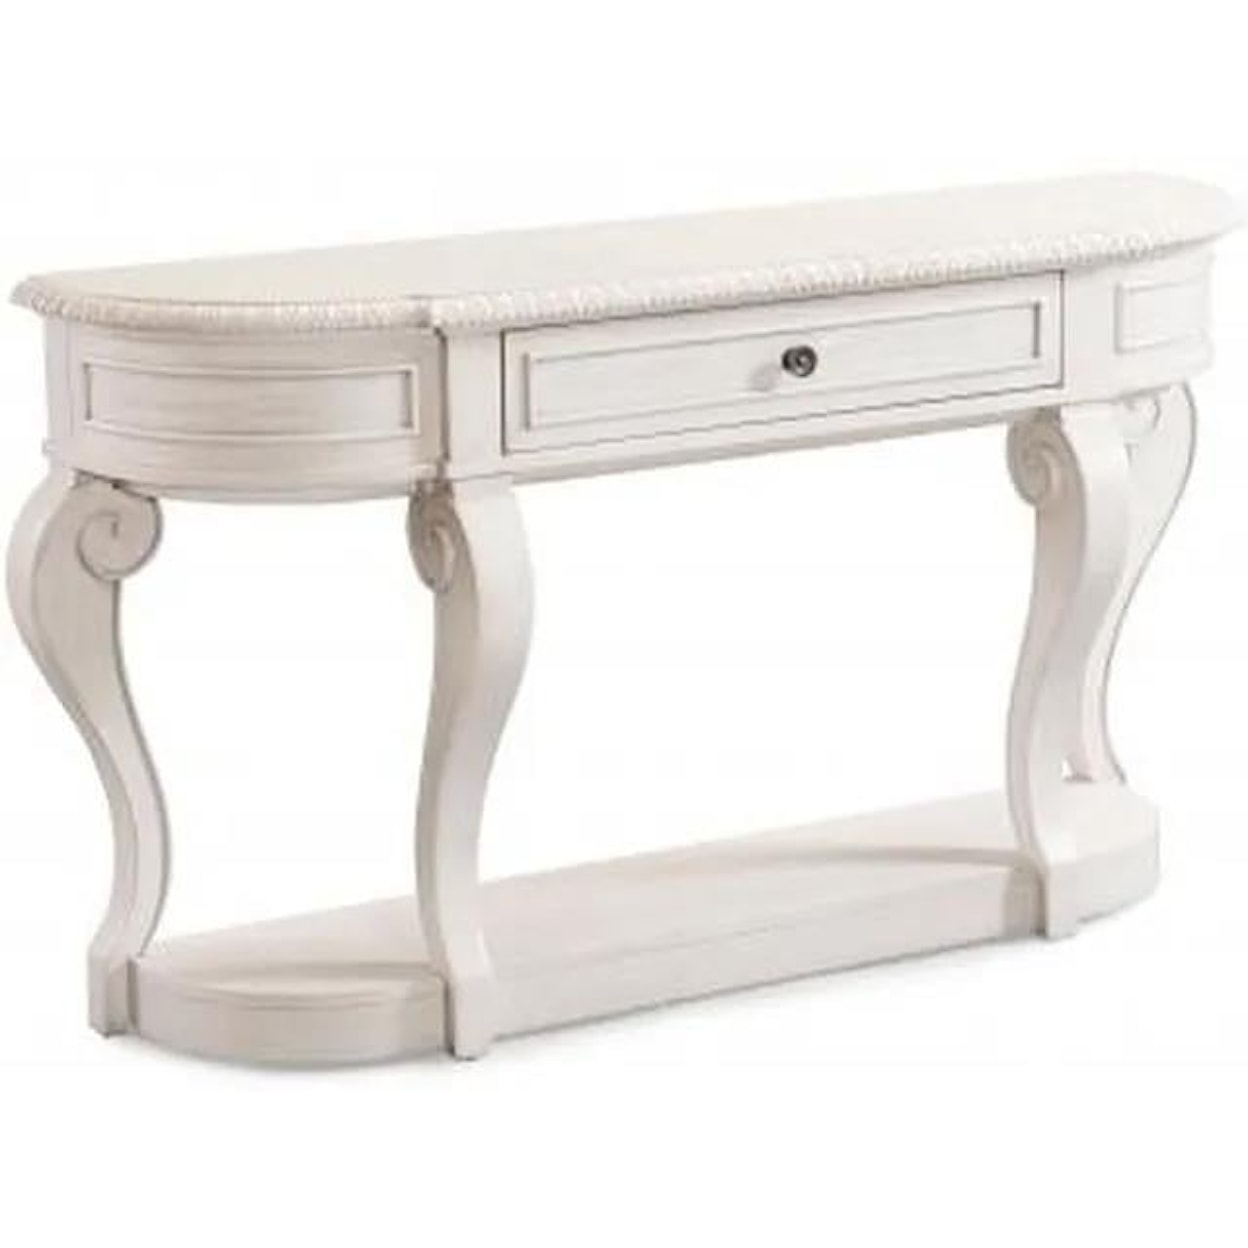 Trisha Yearwood Home Collection by Legacy Classic Jasper County Sofa Table